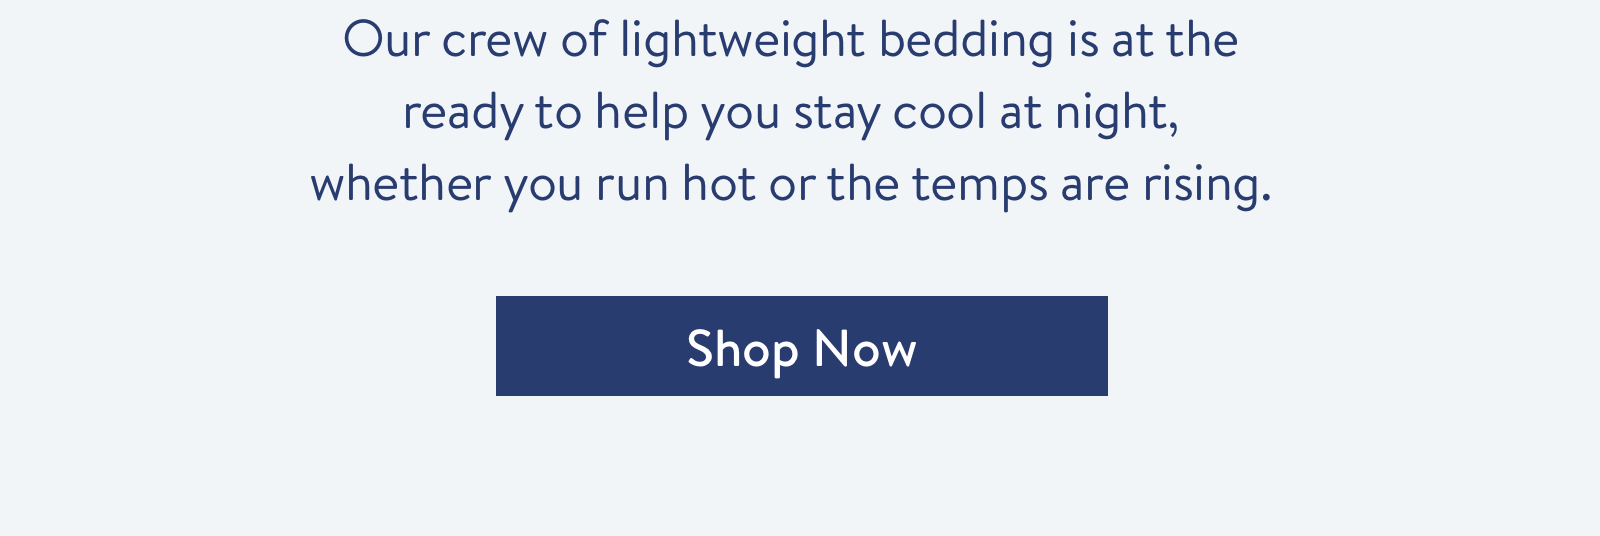 Our crew of lightweight bedding is at the ready to help you stay cool at night, whether you run hot or the temps are rising.